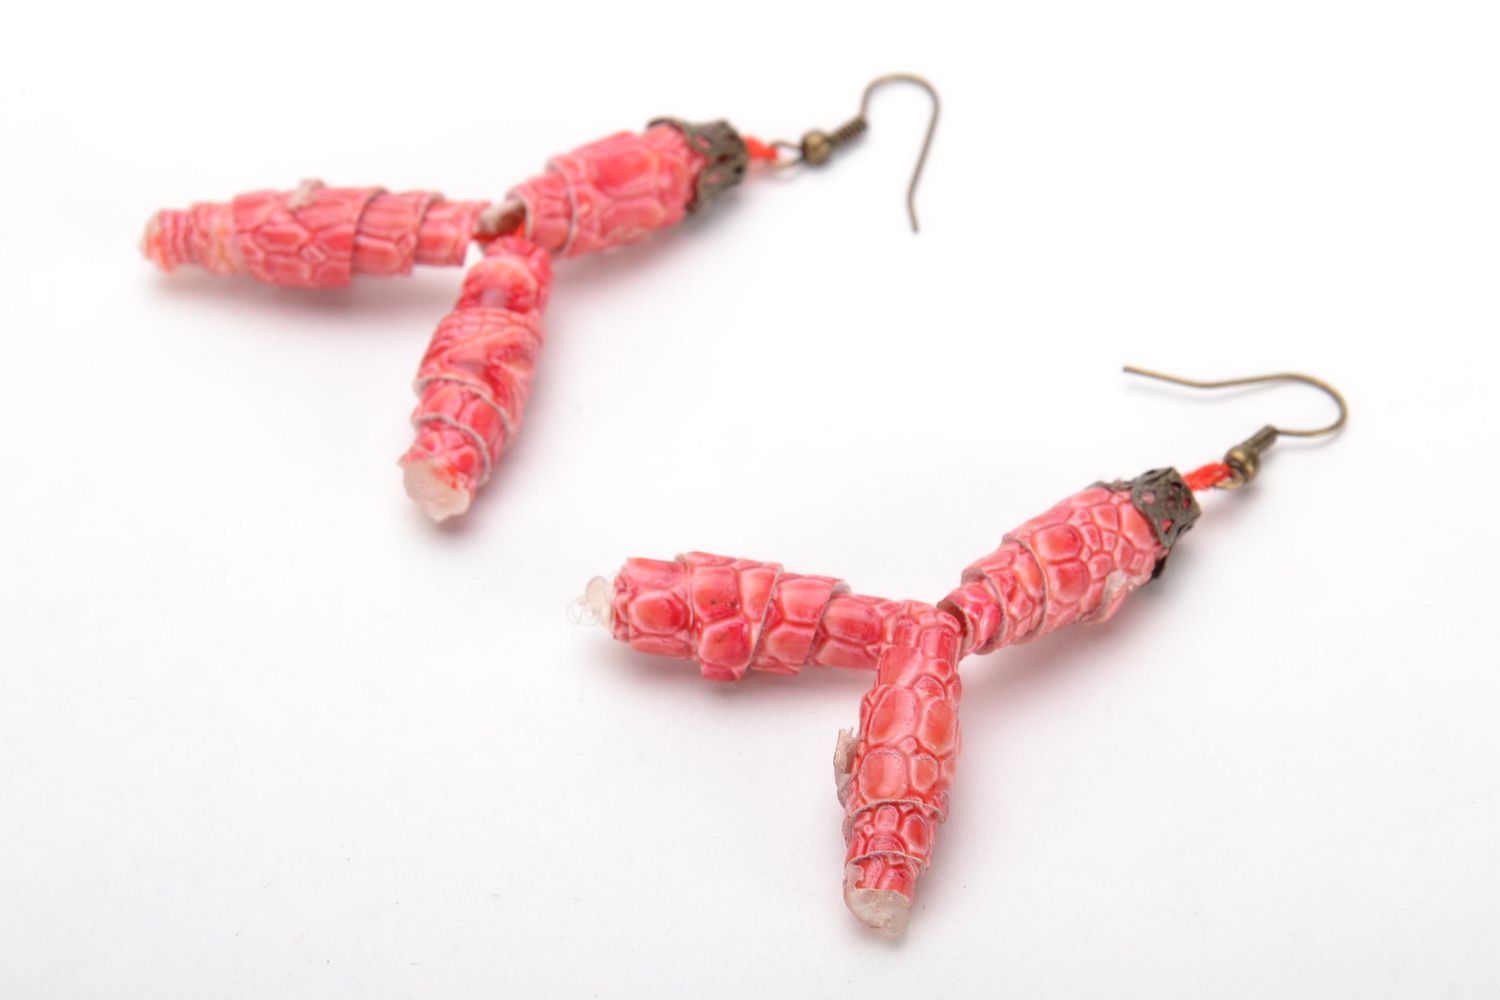 Long earrings made of artificial leather photo 2